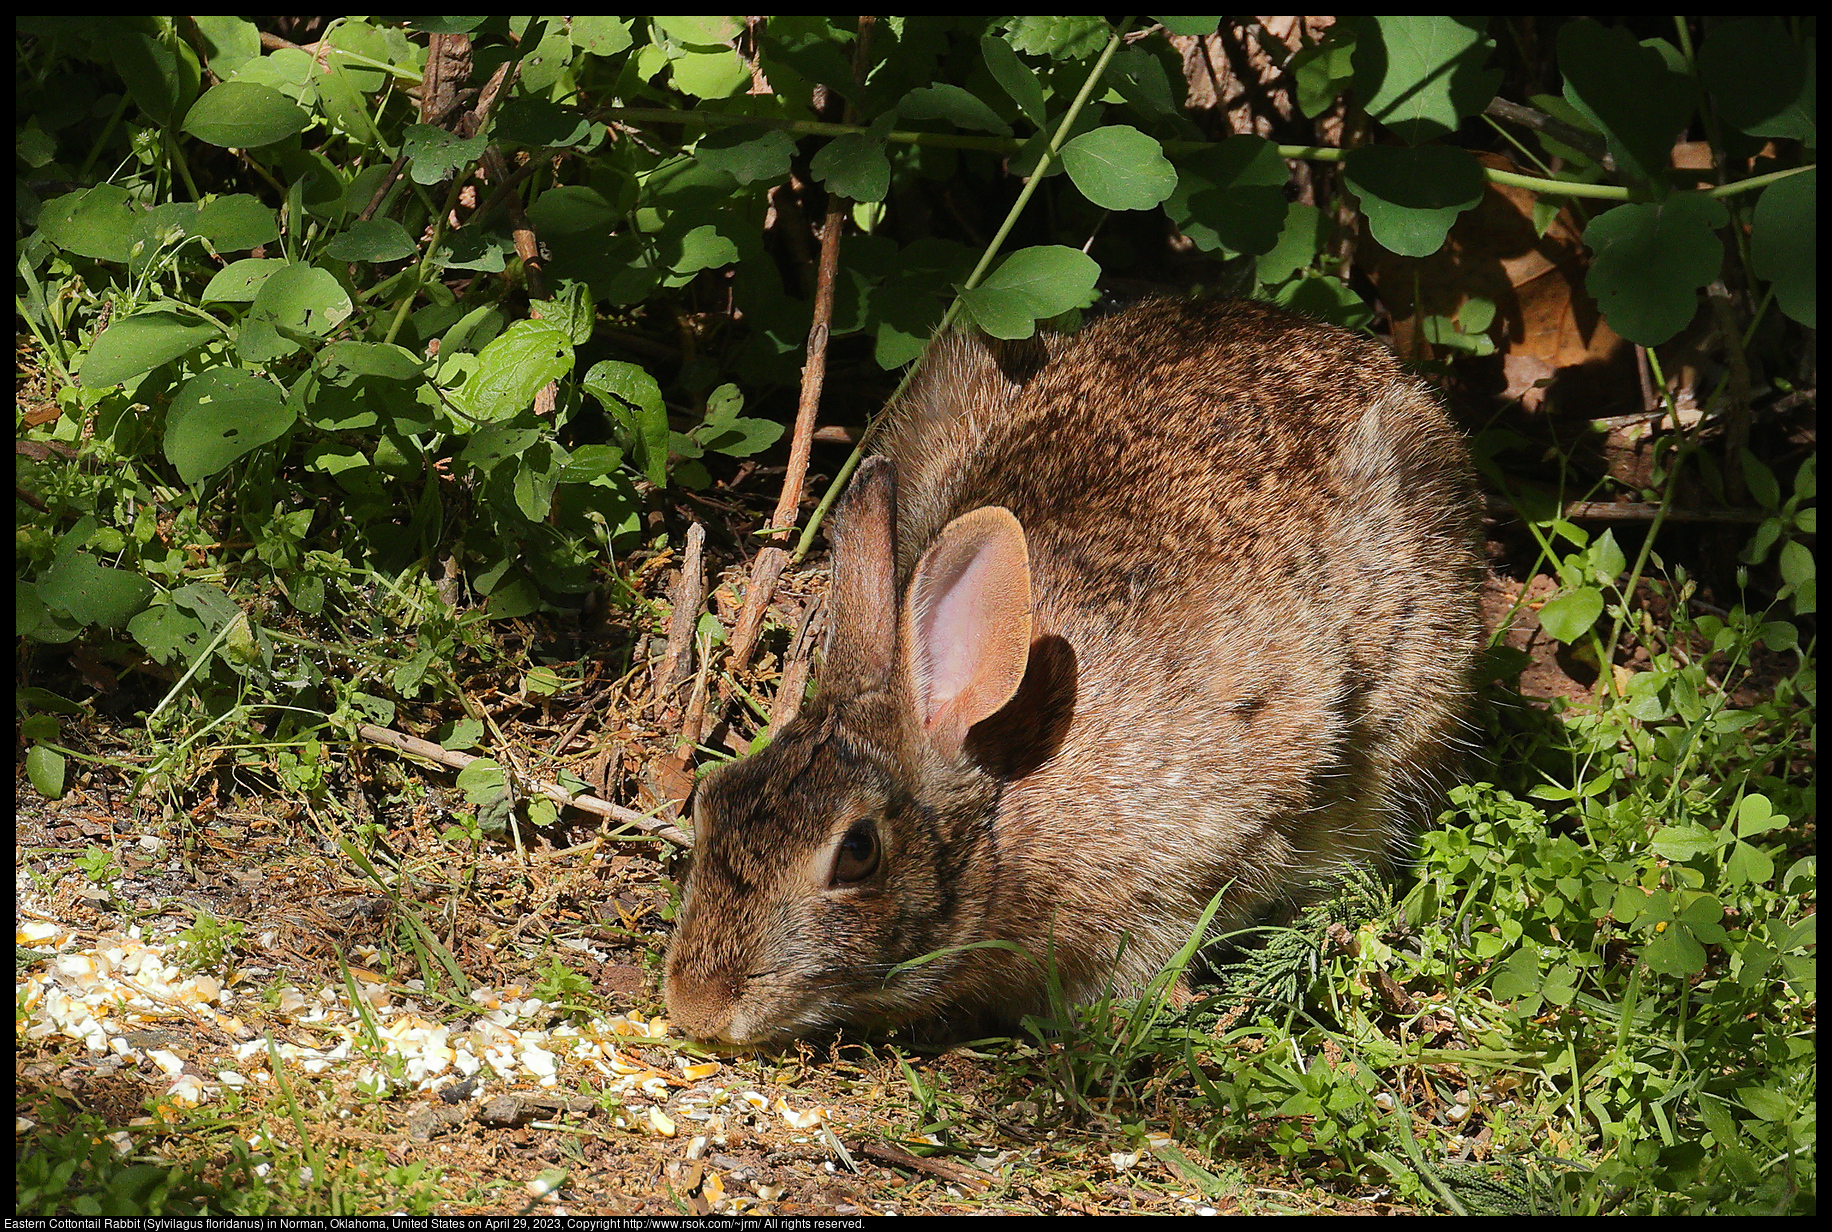 Eastern Cottontail Rabbit (Sylvilagus floridanus) in Norman, Oklahoma, United States on April 29, 2023